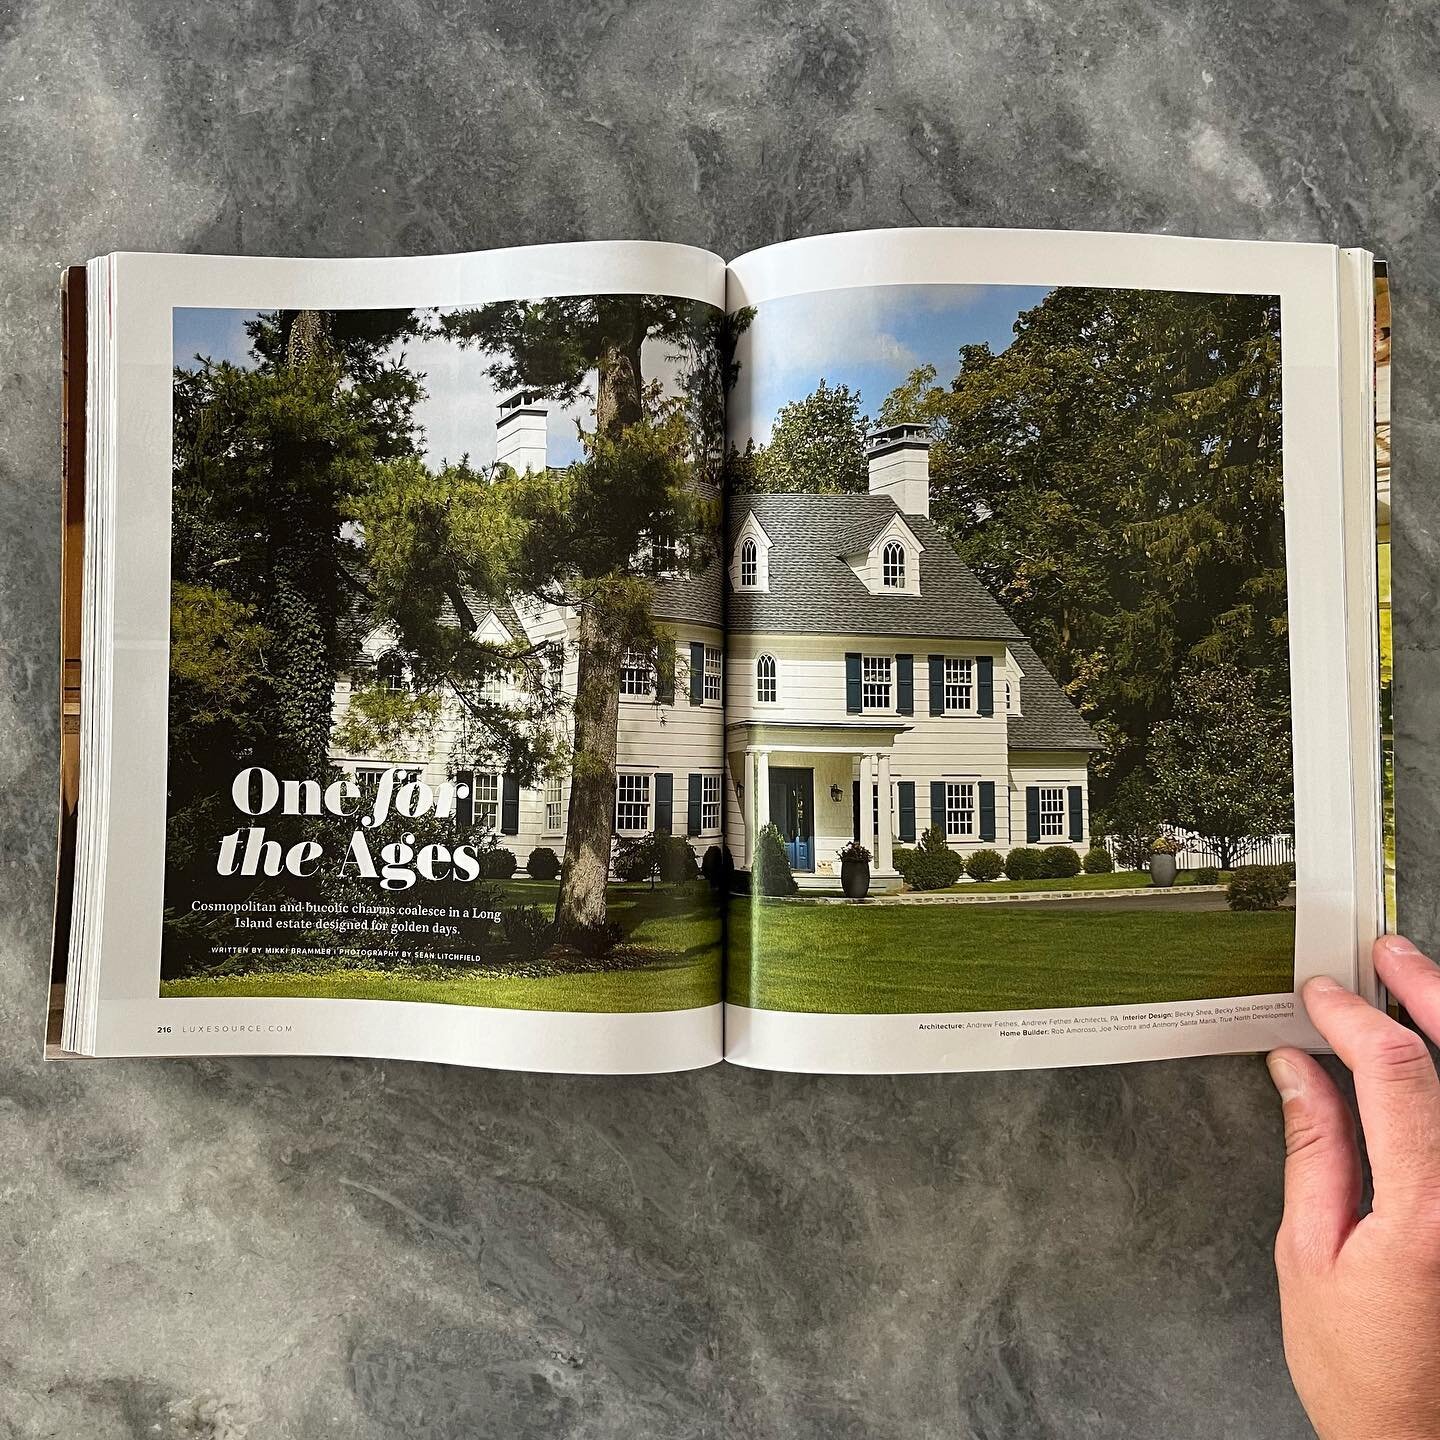 New work in @luxemagazine Greater New York. An idyllic home on Long Island designed by @beckymshea. Thanks for making this happen @gracebeuley @mikkibrammer @_ccpr ☺️